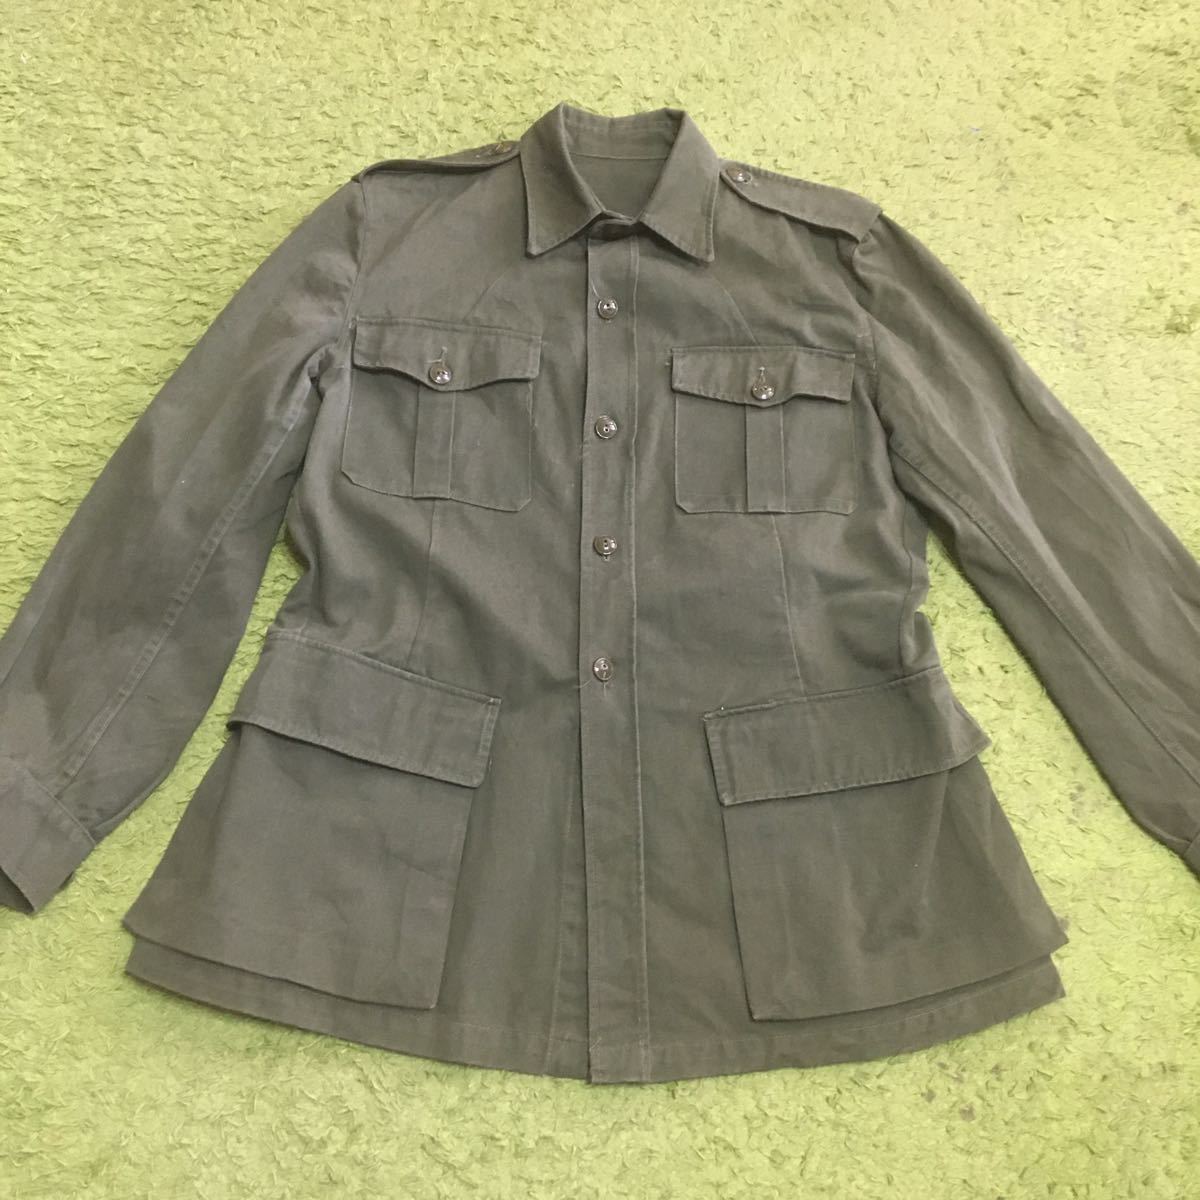 【made in Canada】it's extra rare/60's military vintage/Canadian Army/TROPICAL FIELD JACKET/OD.NO.7/size13/